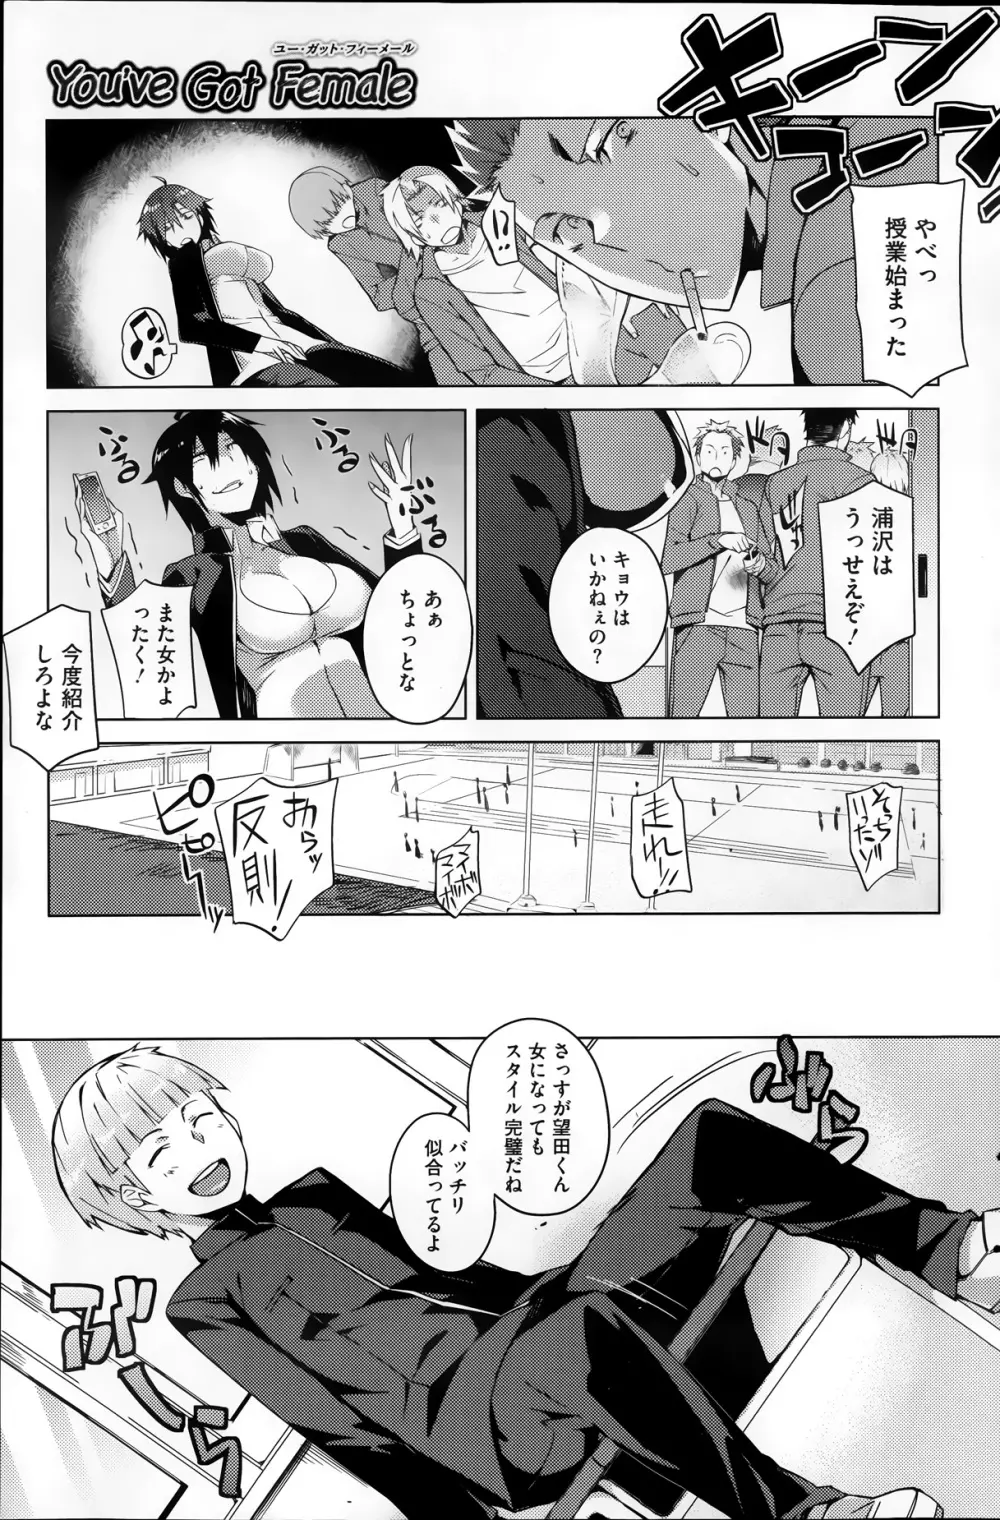 You've Got Female 第01-03話 Page.7